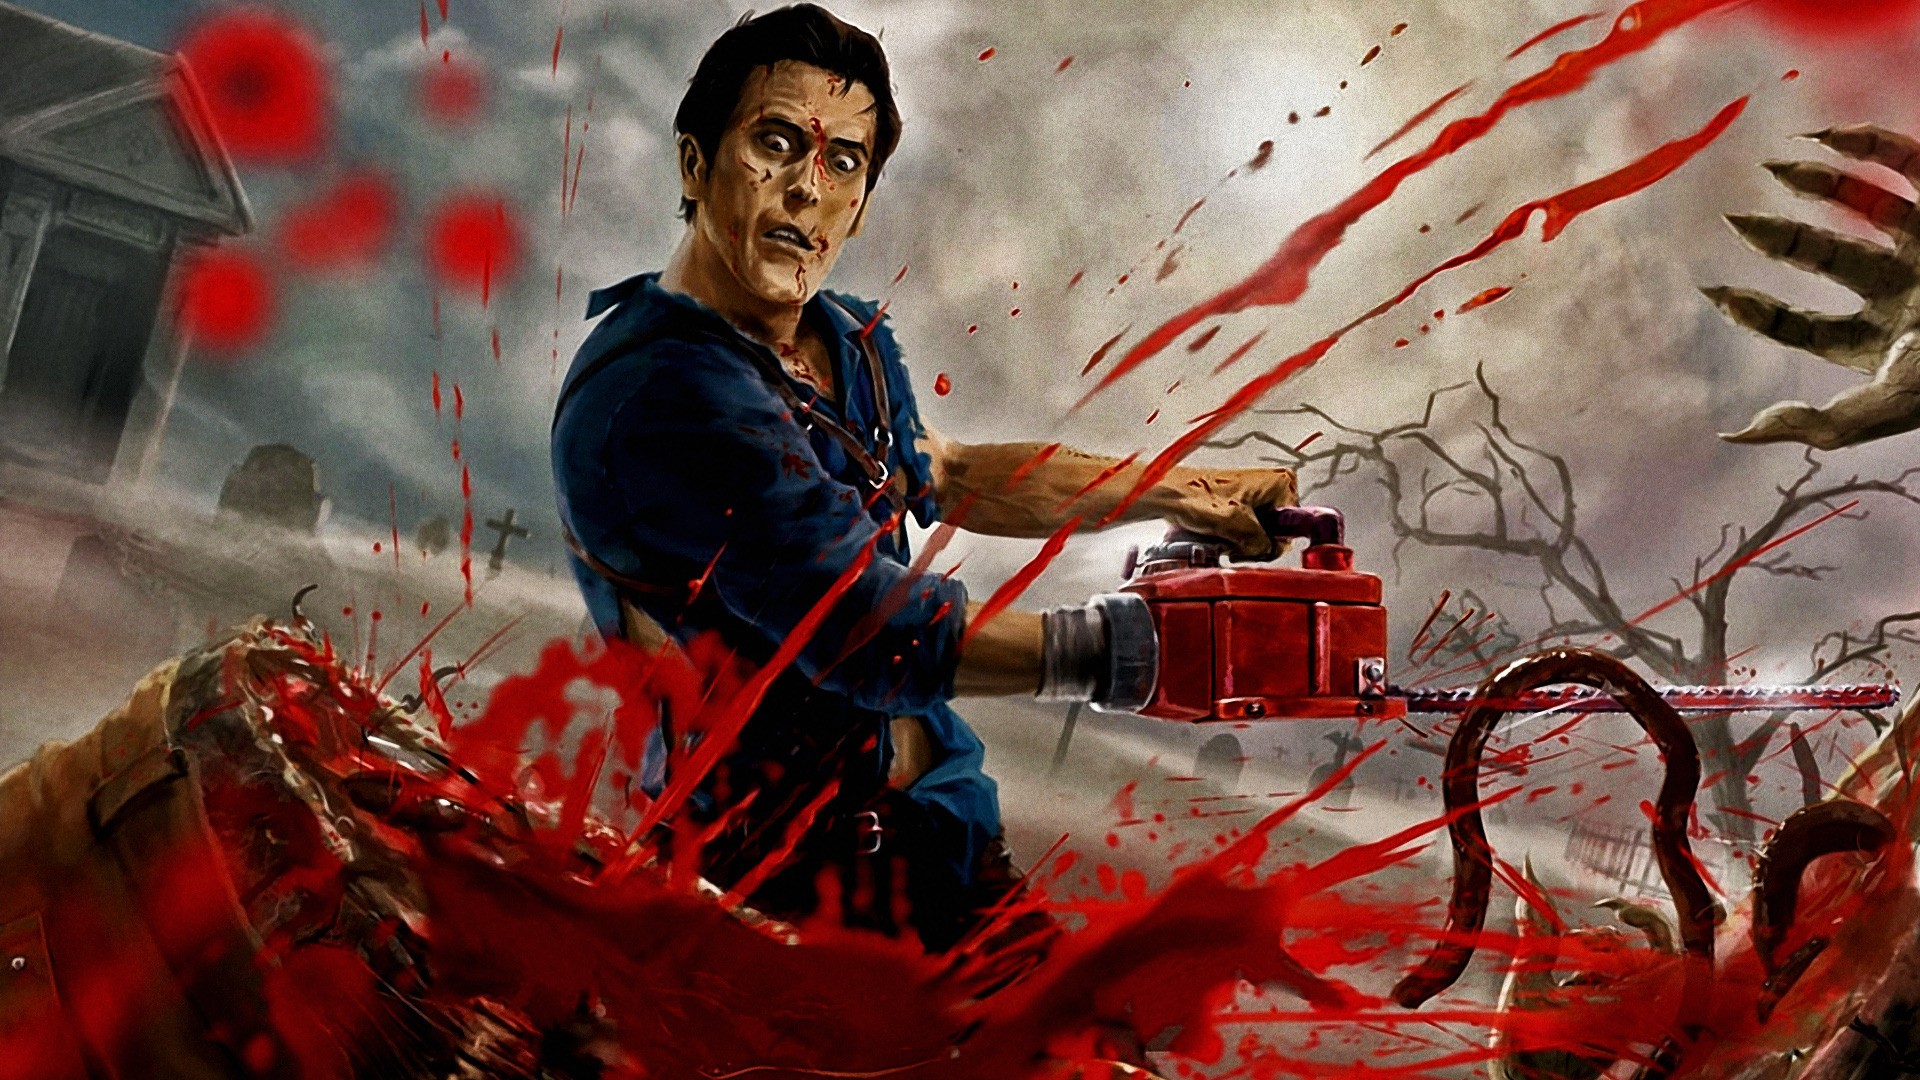 General 1920x1080 ash Evil Dead blood artwork Bruce Campbell movies horror gore chainsaws